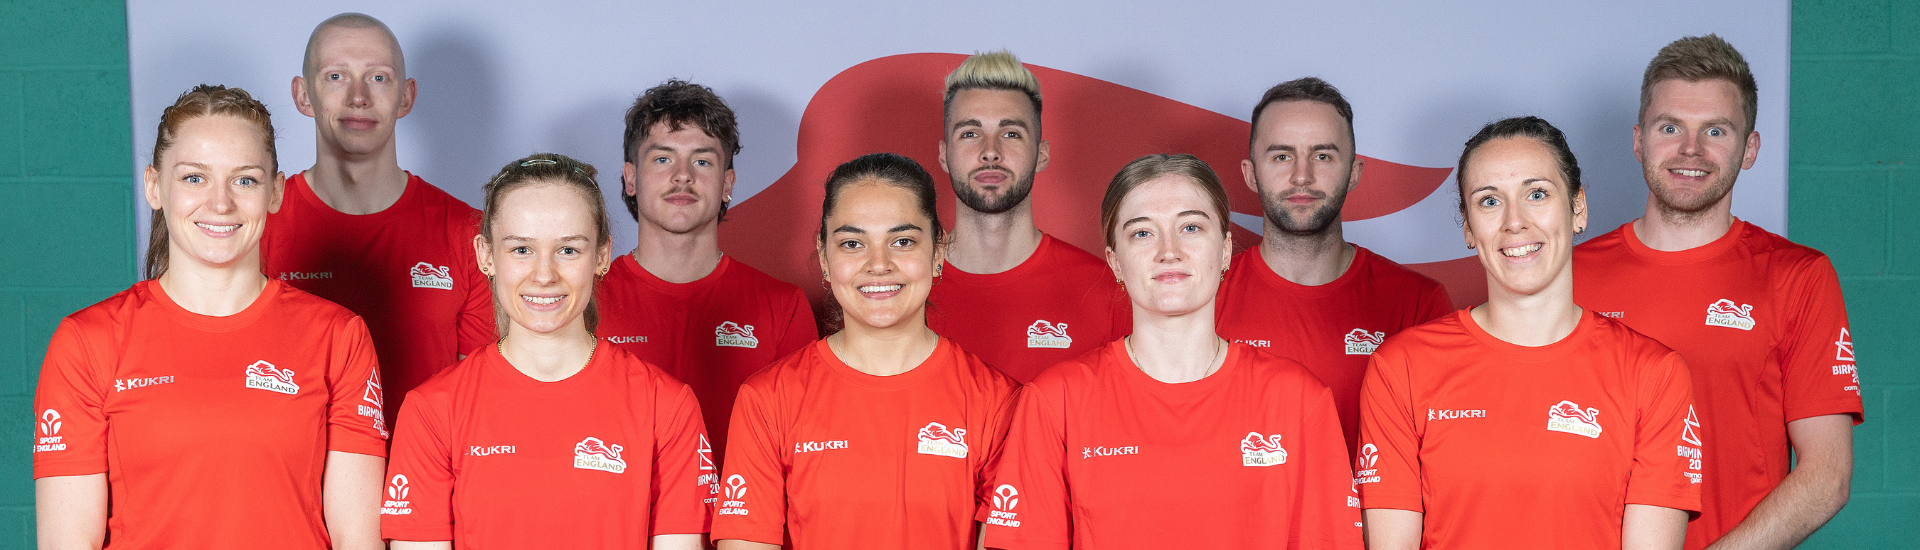 Preview Commonwealth Games Mixed Team Event Badminton England